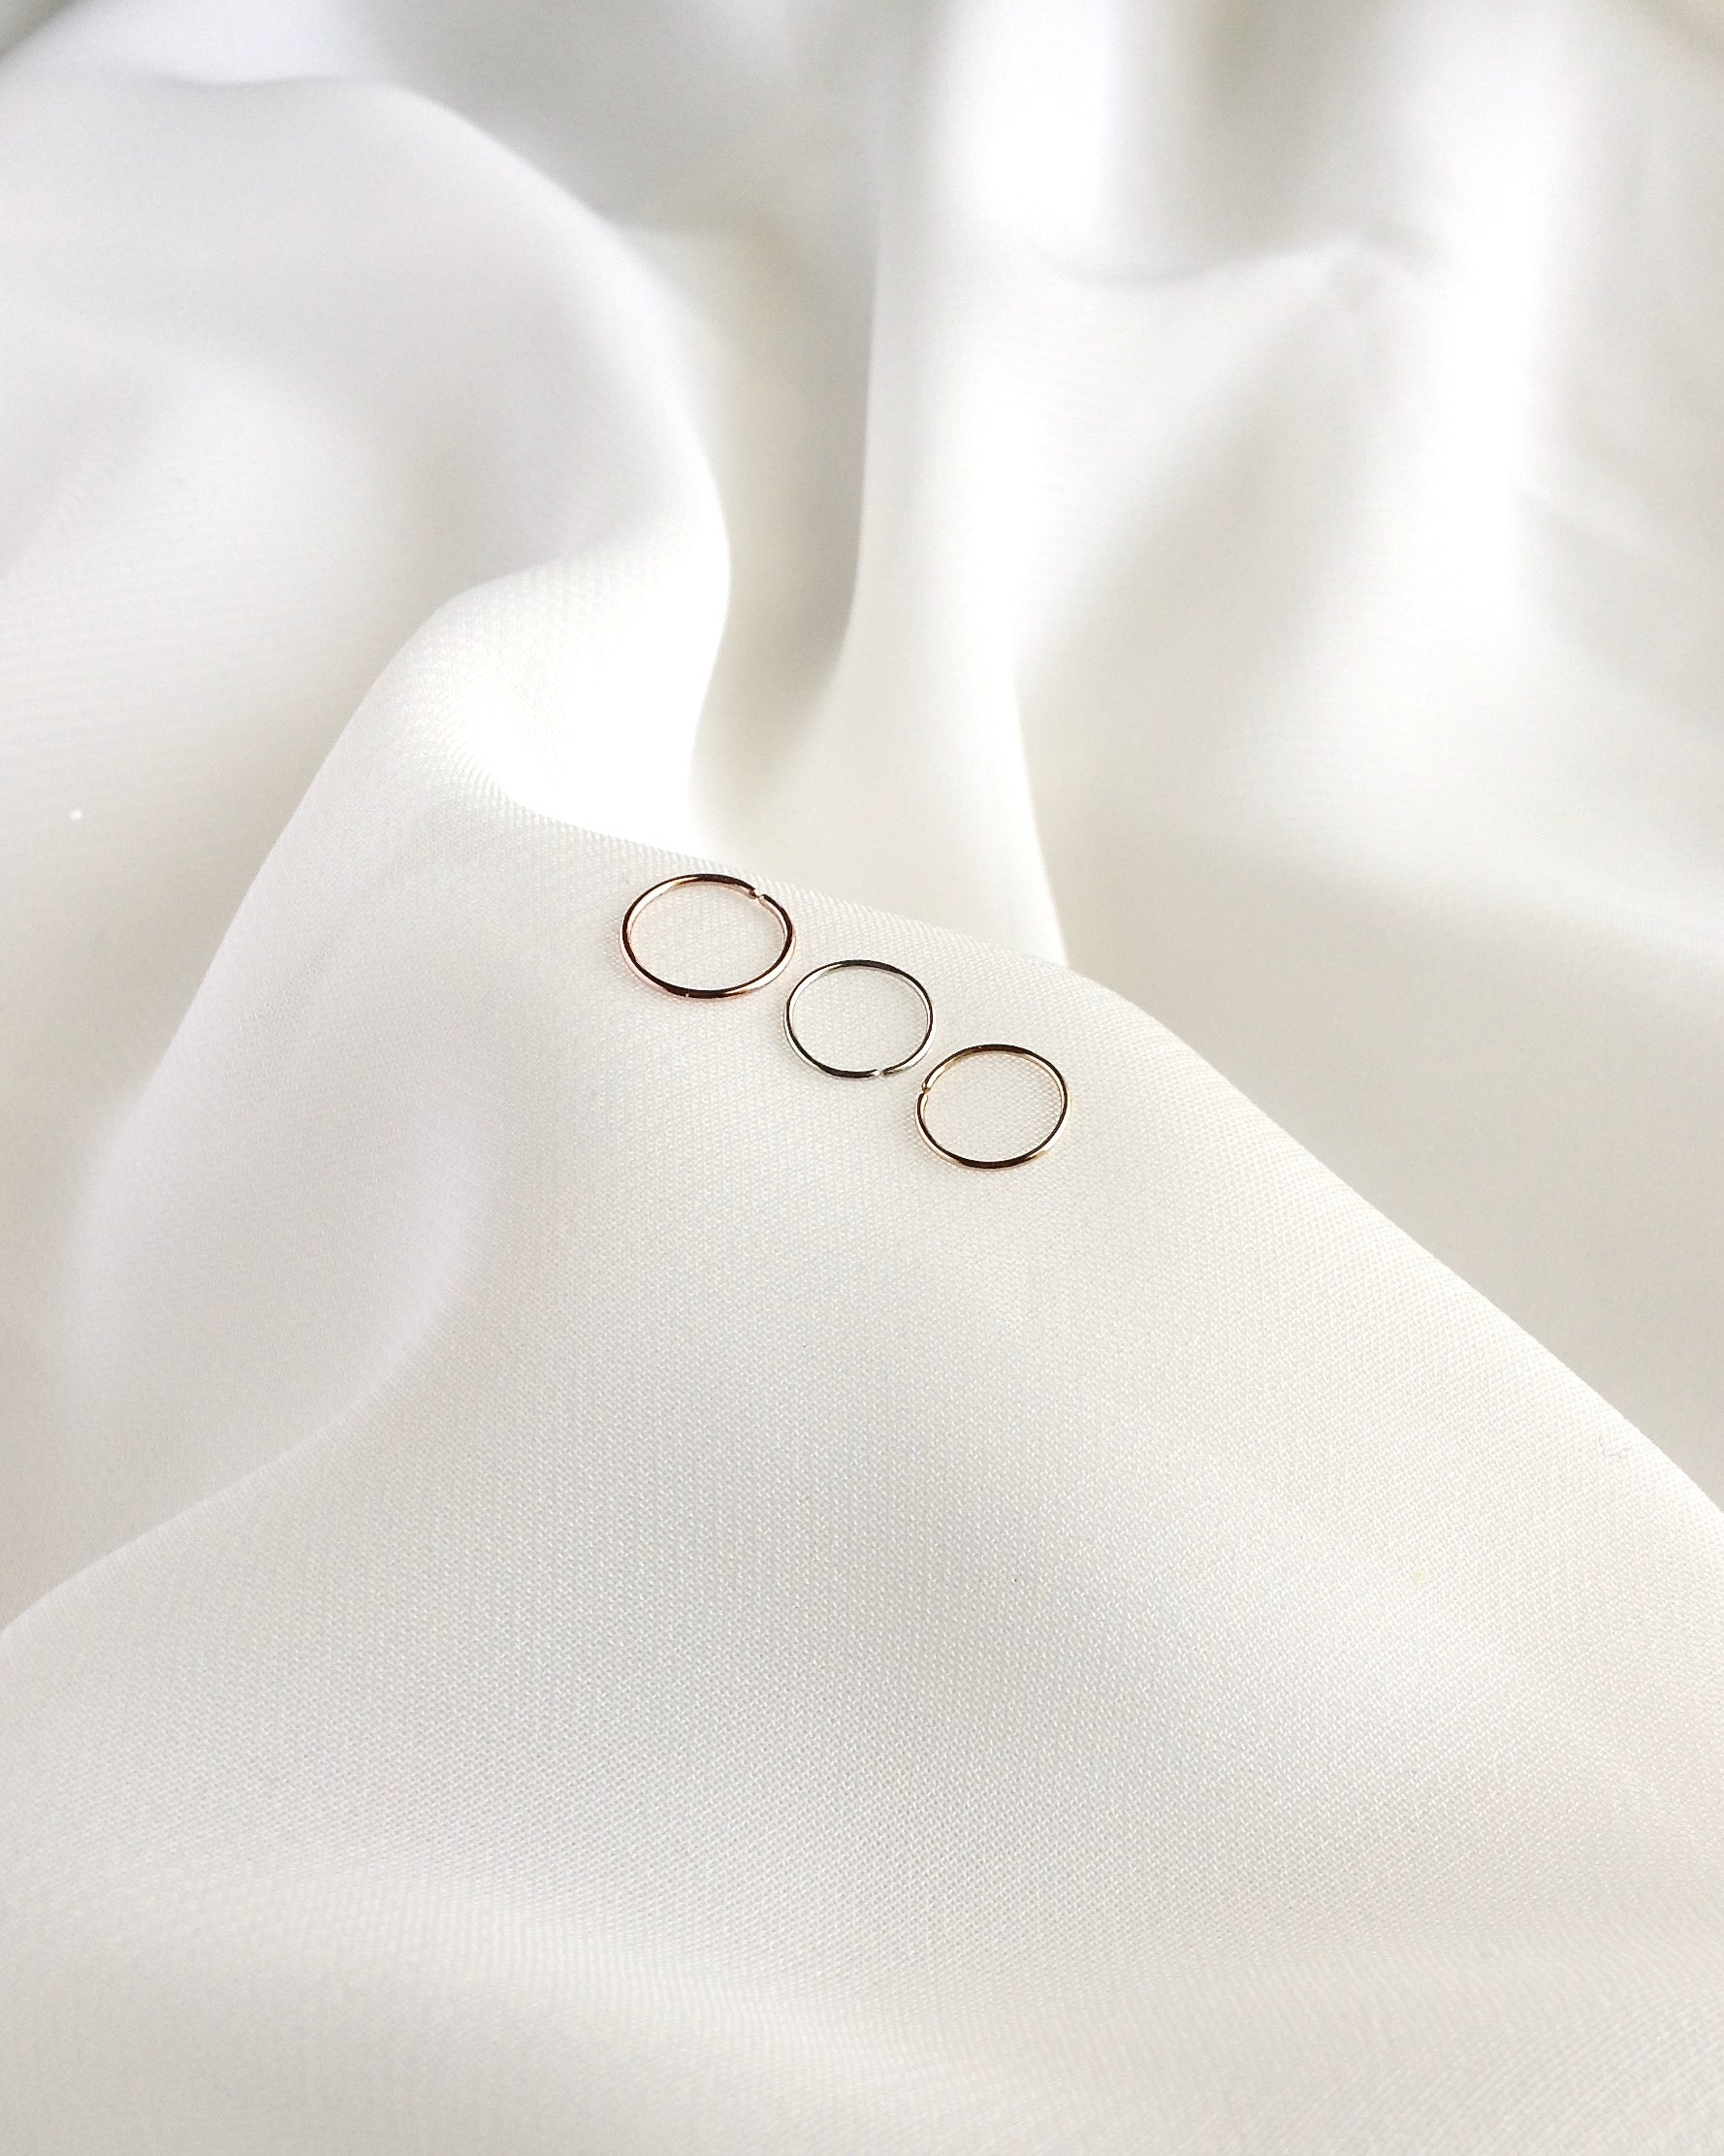 Conch Hoop | Large Cartilage Hoop | Conch Piercing Hoop in Gold Filled Sterling Silver or Rose Gold Filled | IB Jewelry